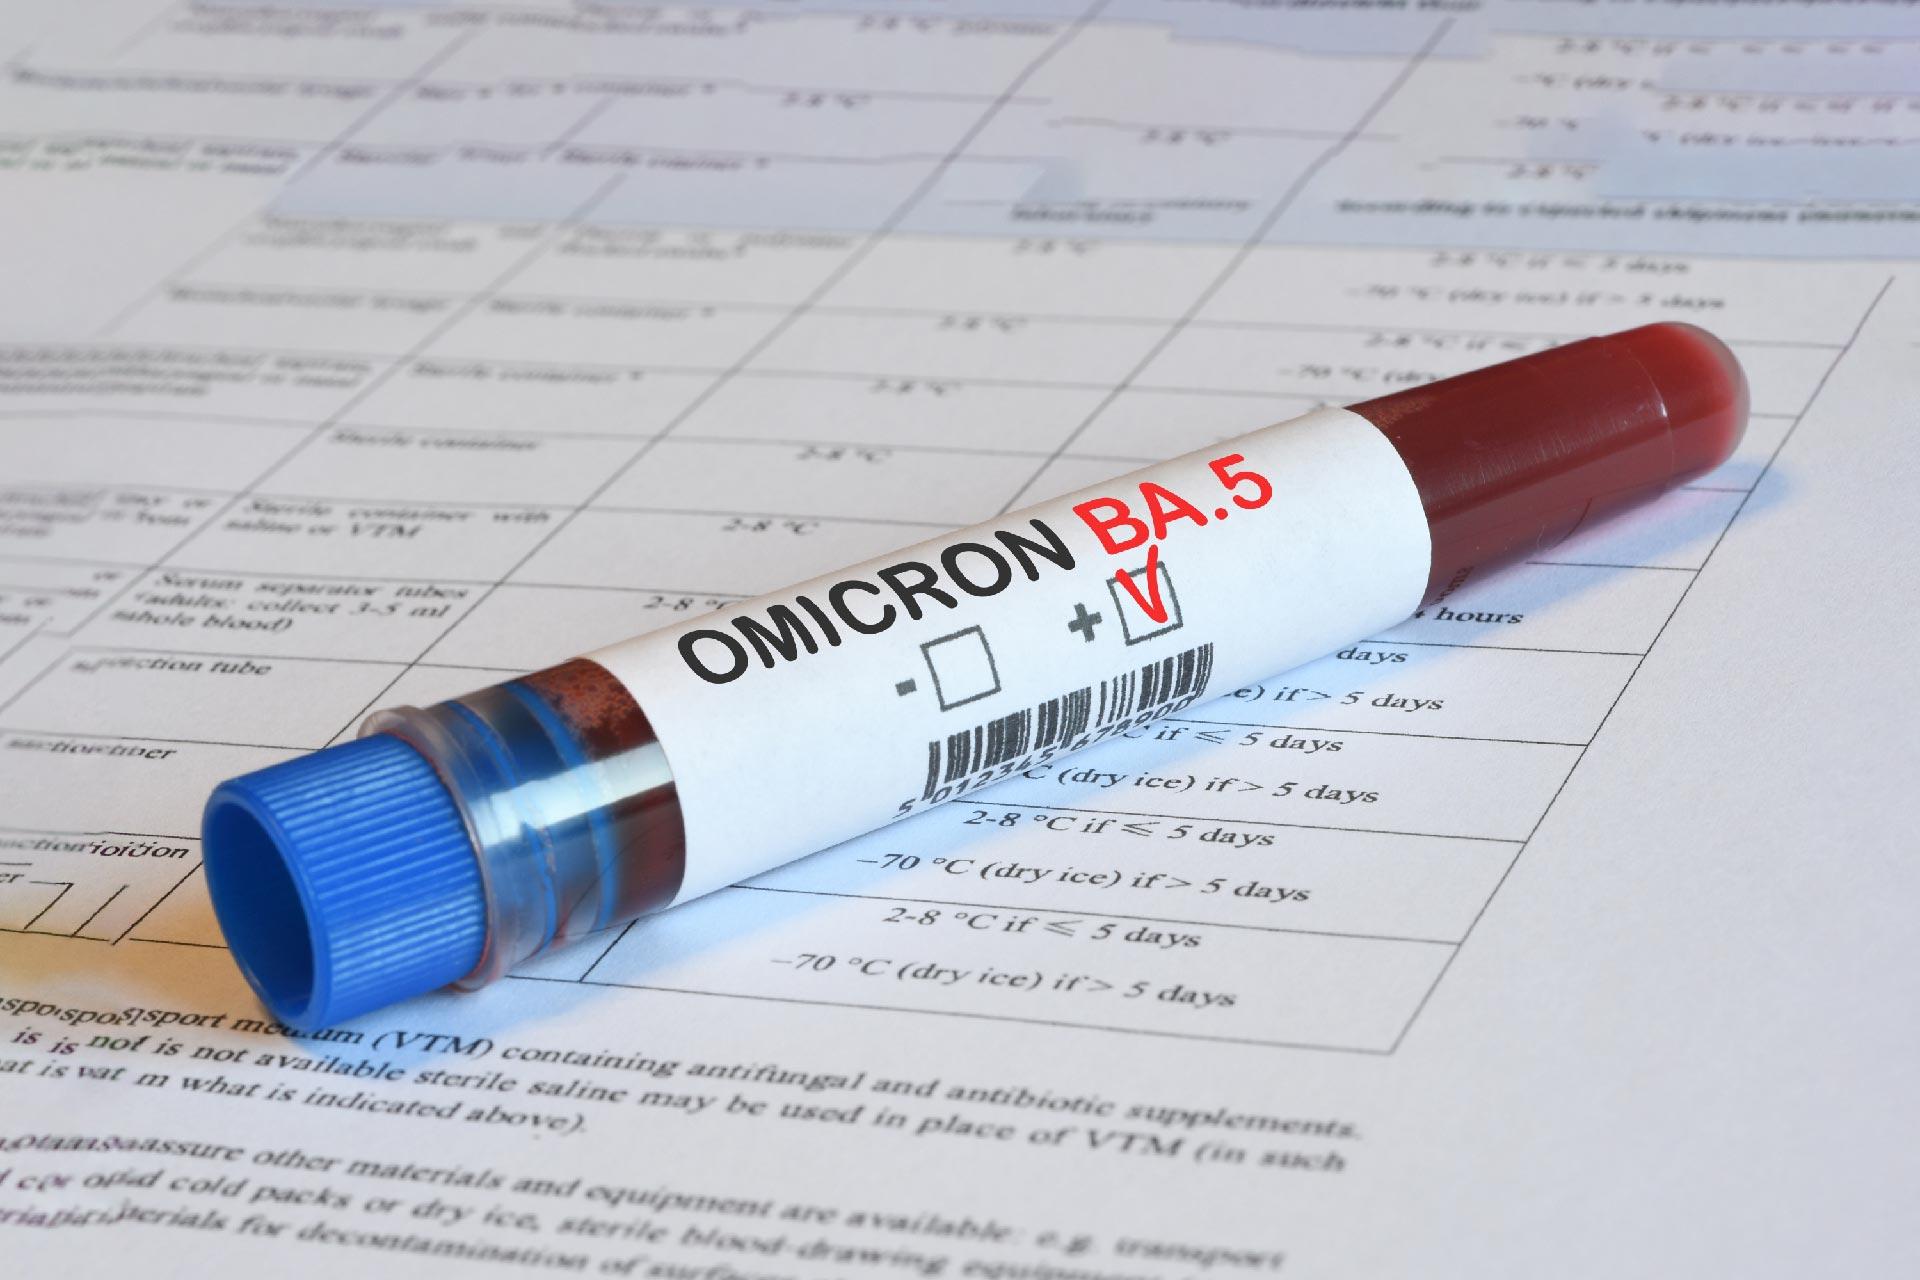 Omicron BA.5: What are The Symptoms, and How Dangerous Is It?